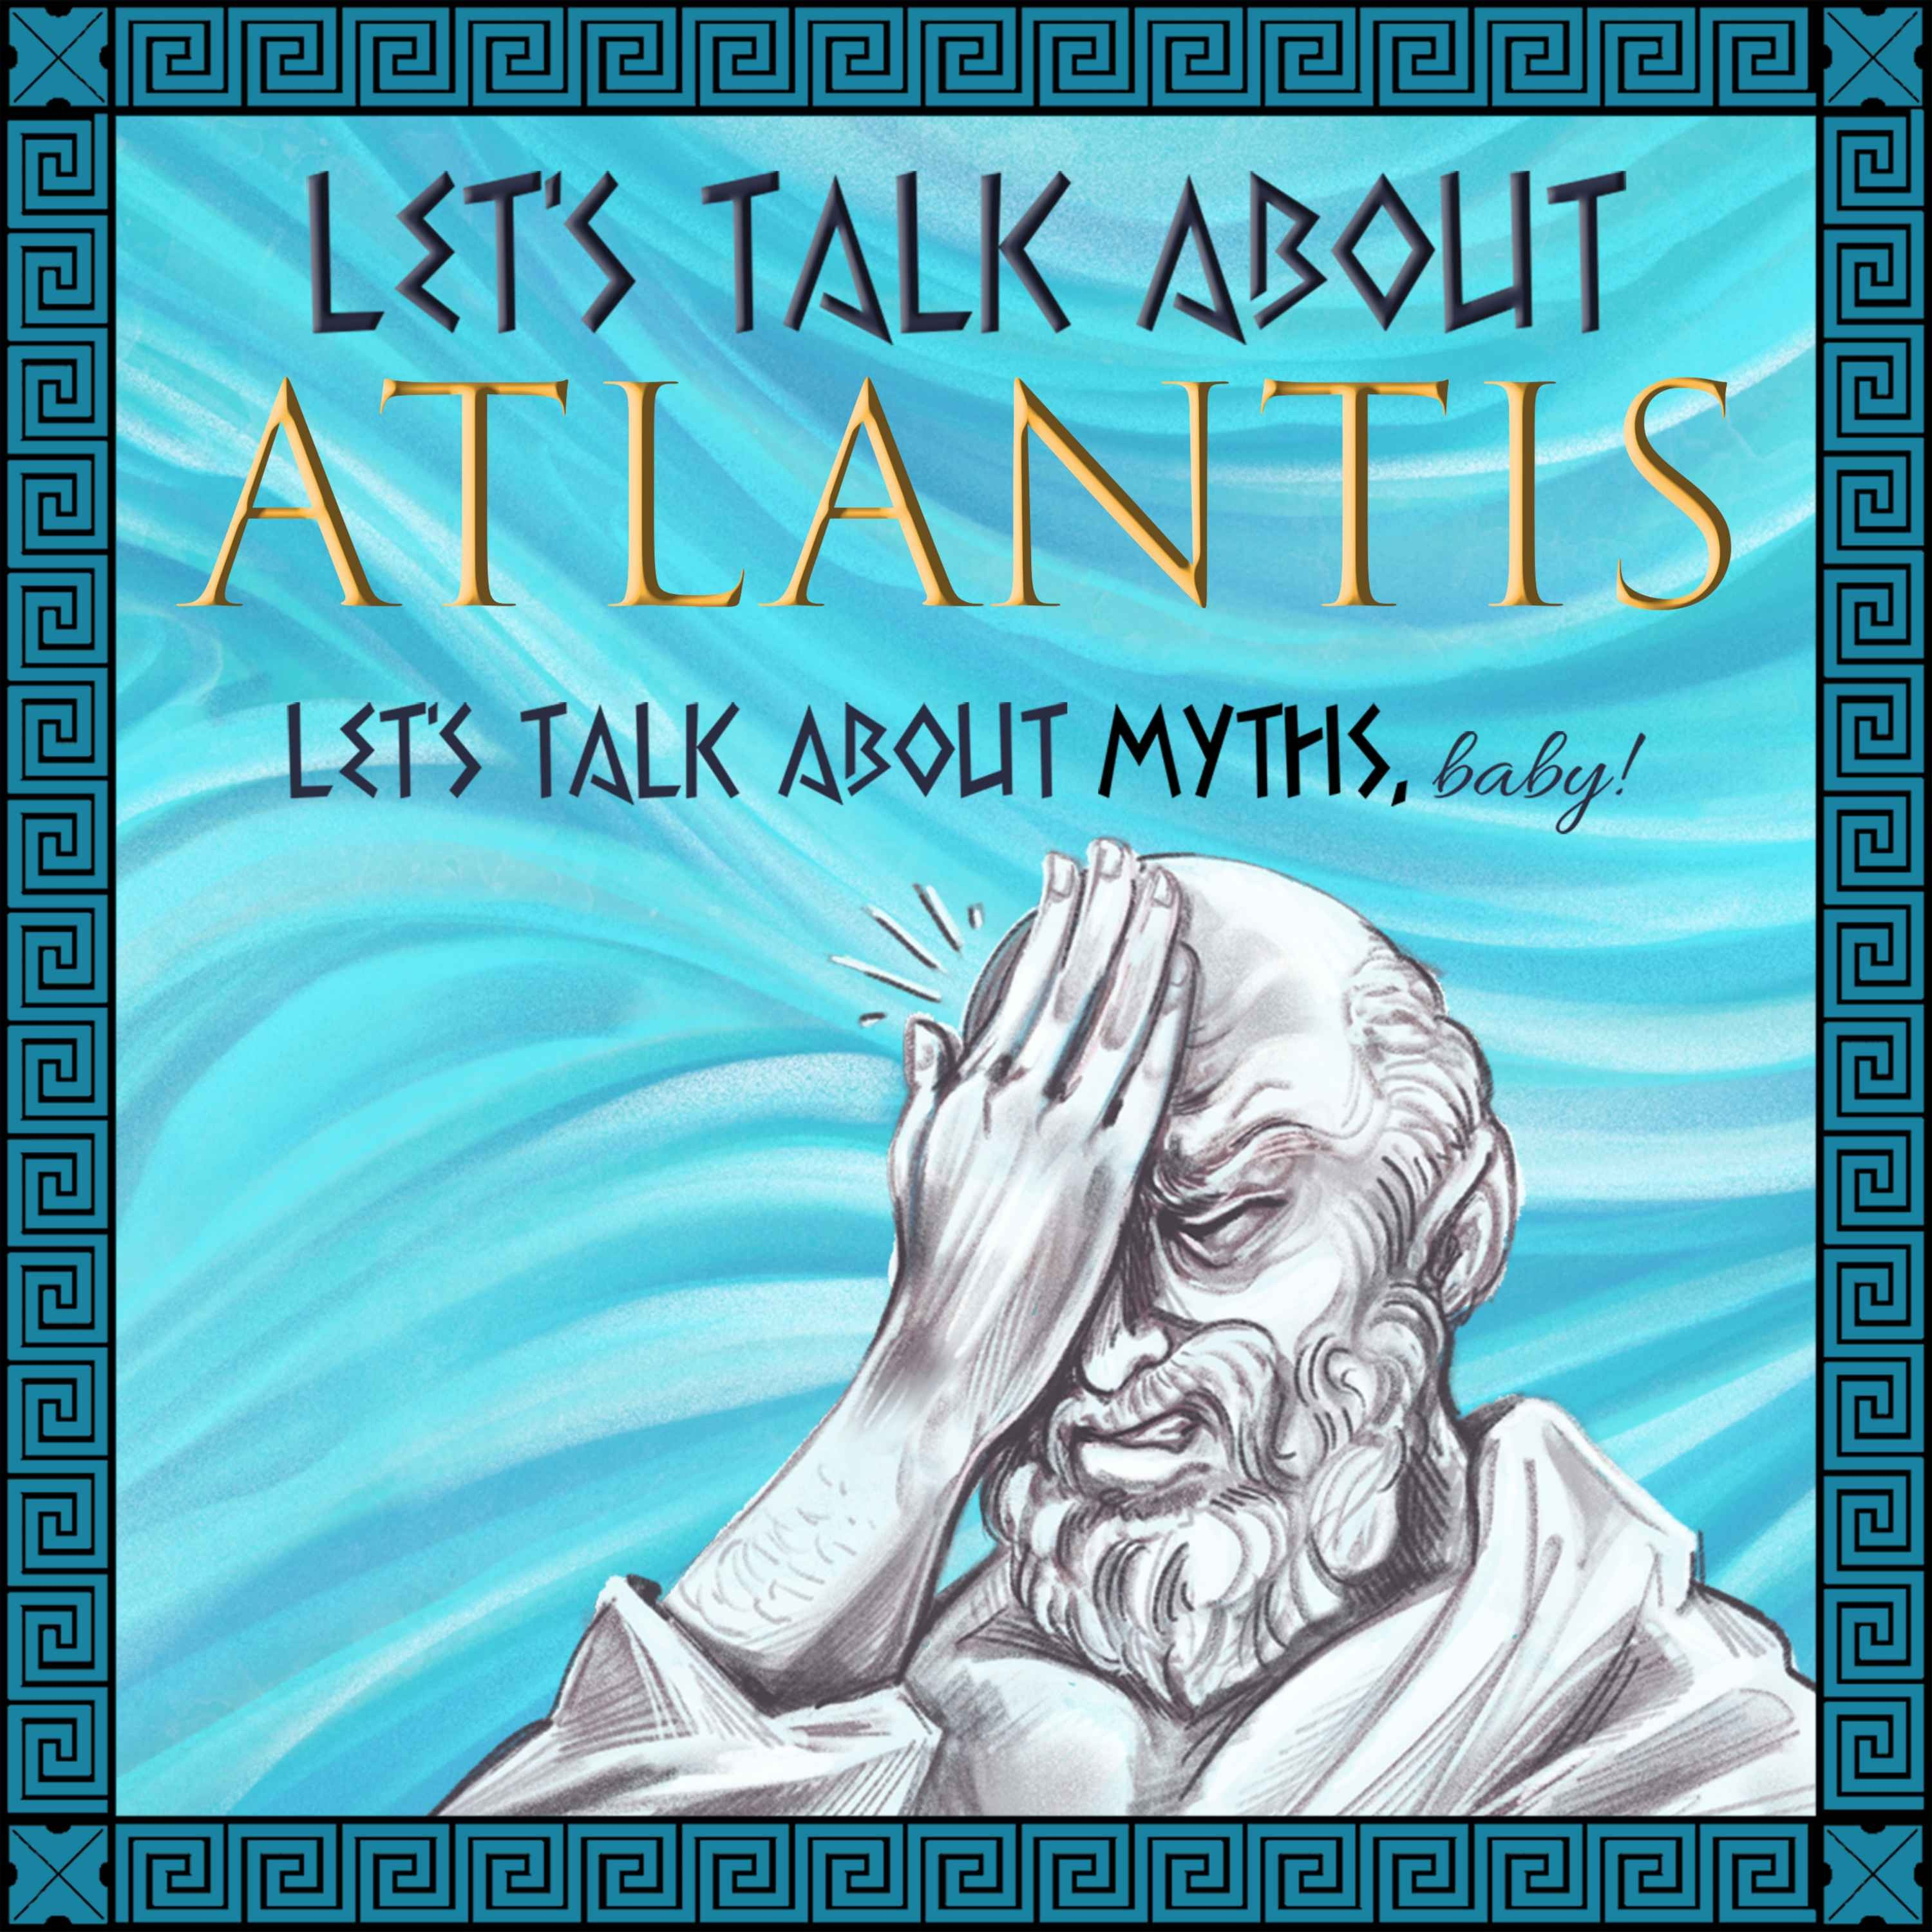 Why Isn't it a Myth? & What Makes Atlantis What It is, A Very Atlantean Q&A